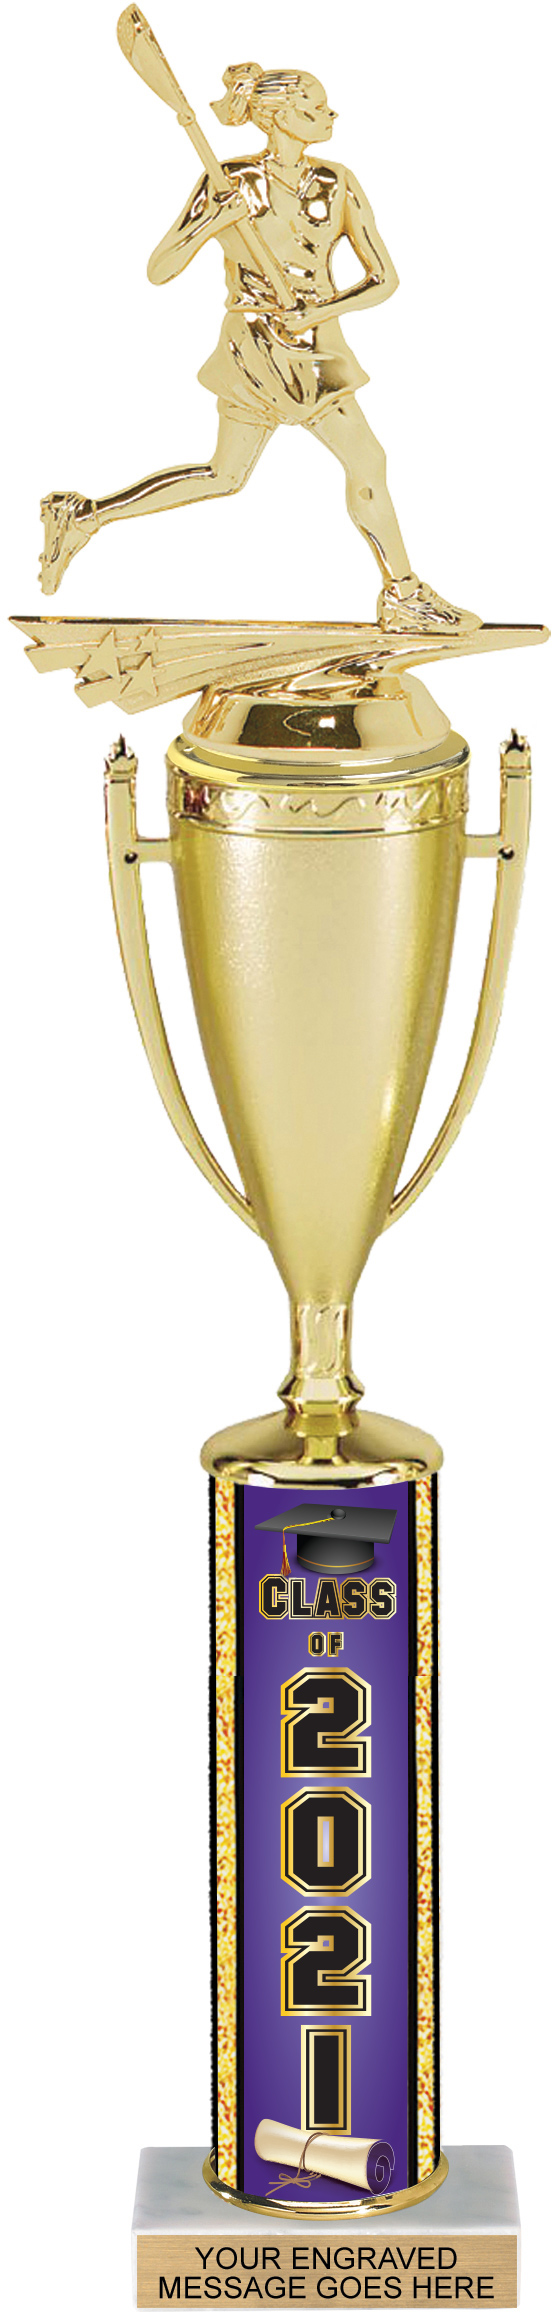 Class of 2021 17 inch Column Cup Trophy